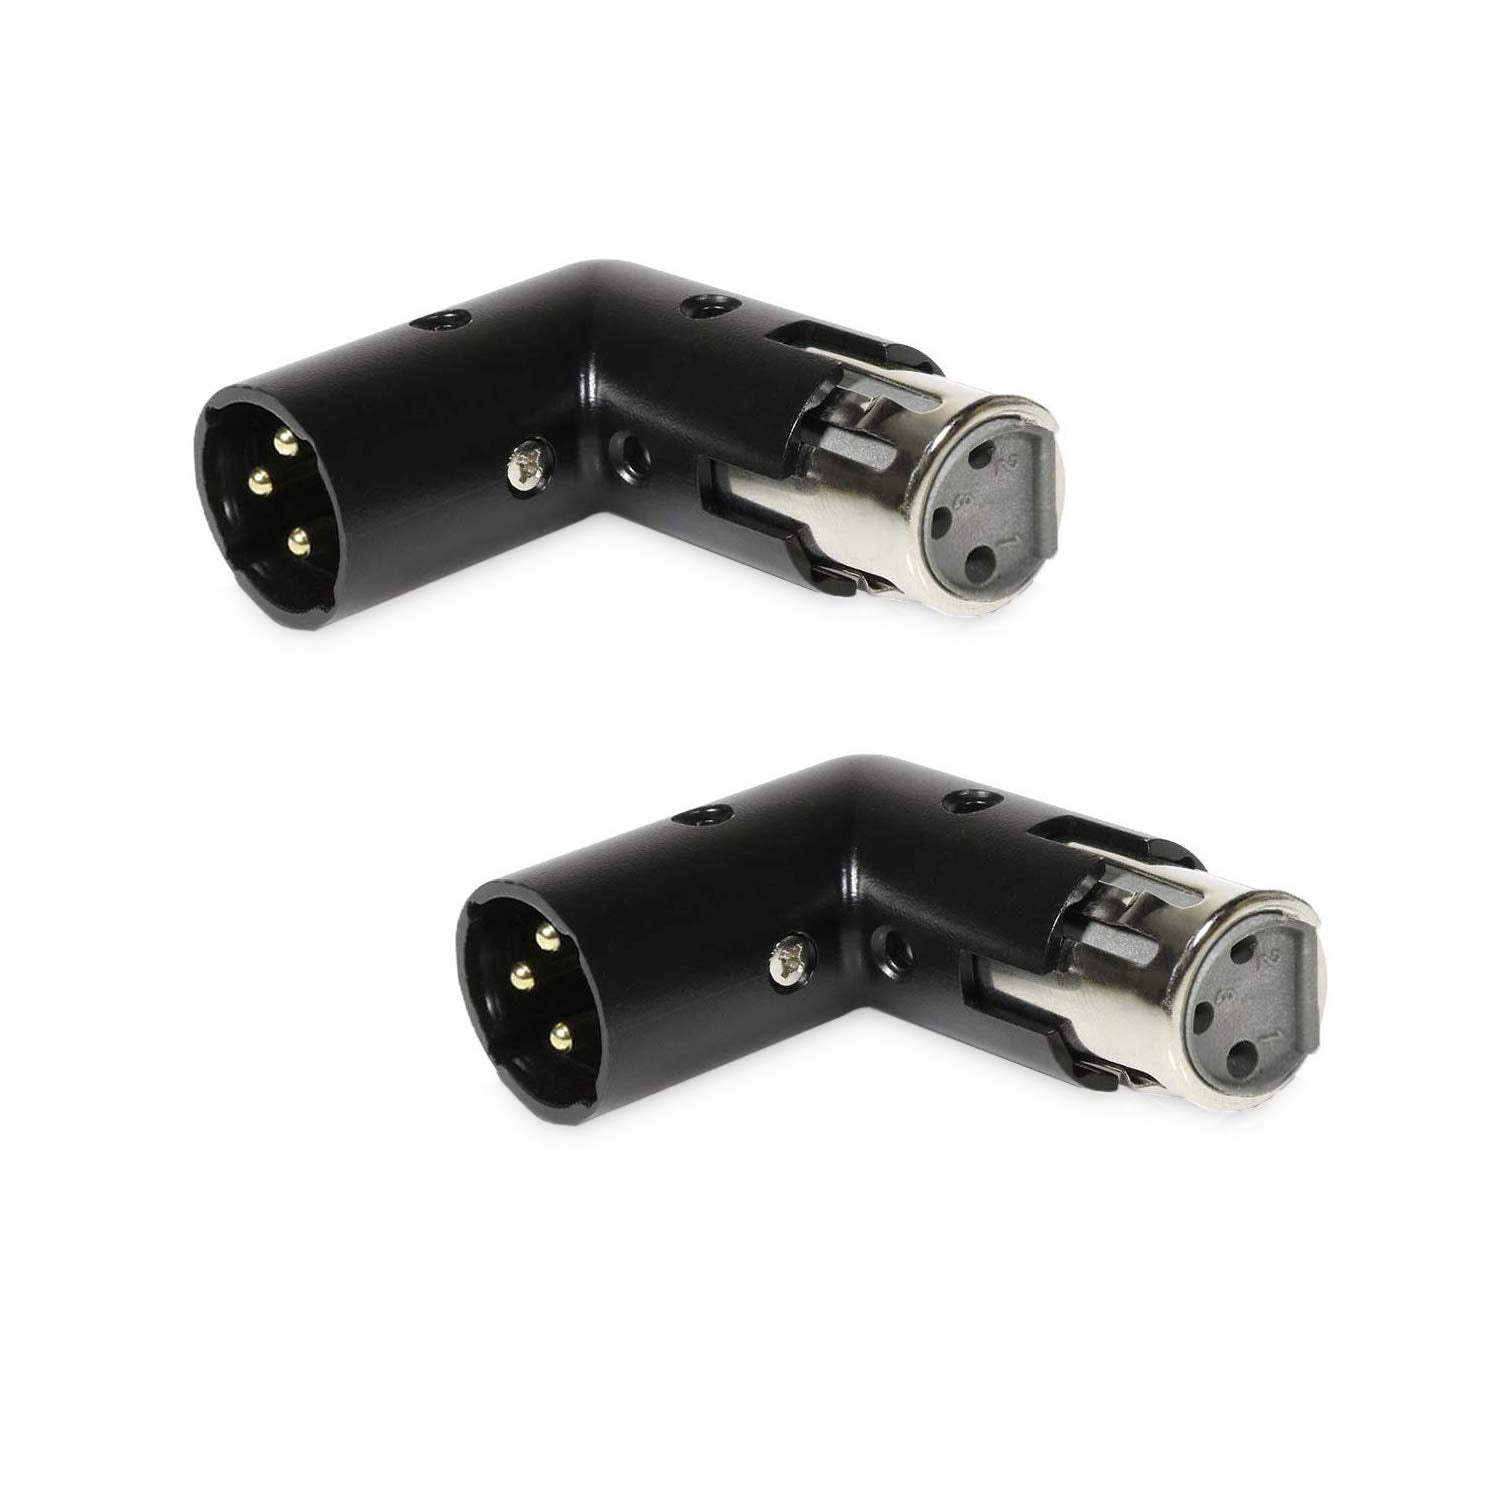 COLUBER CABLE Angle Adapter rotatable Camcorder XLR Adapter  - Like New